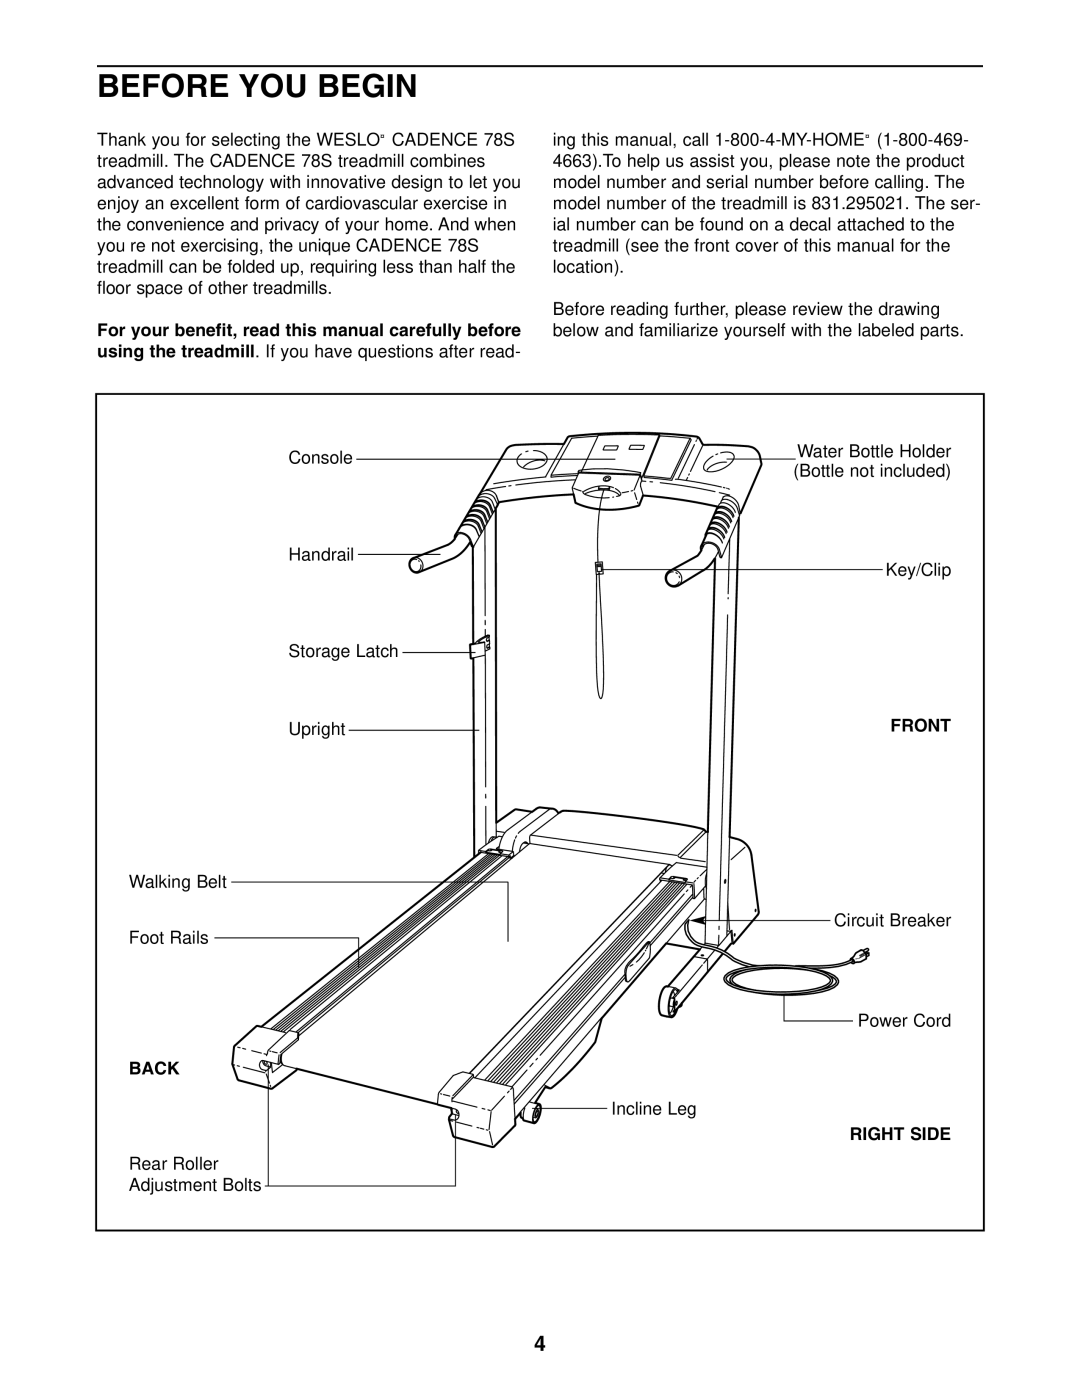 Weslo 831.295021 user manual Before YOU Begin, Front, Back, Right Side 